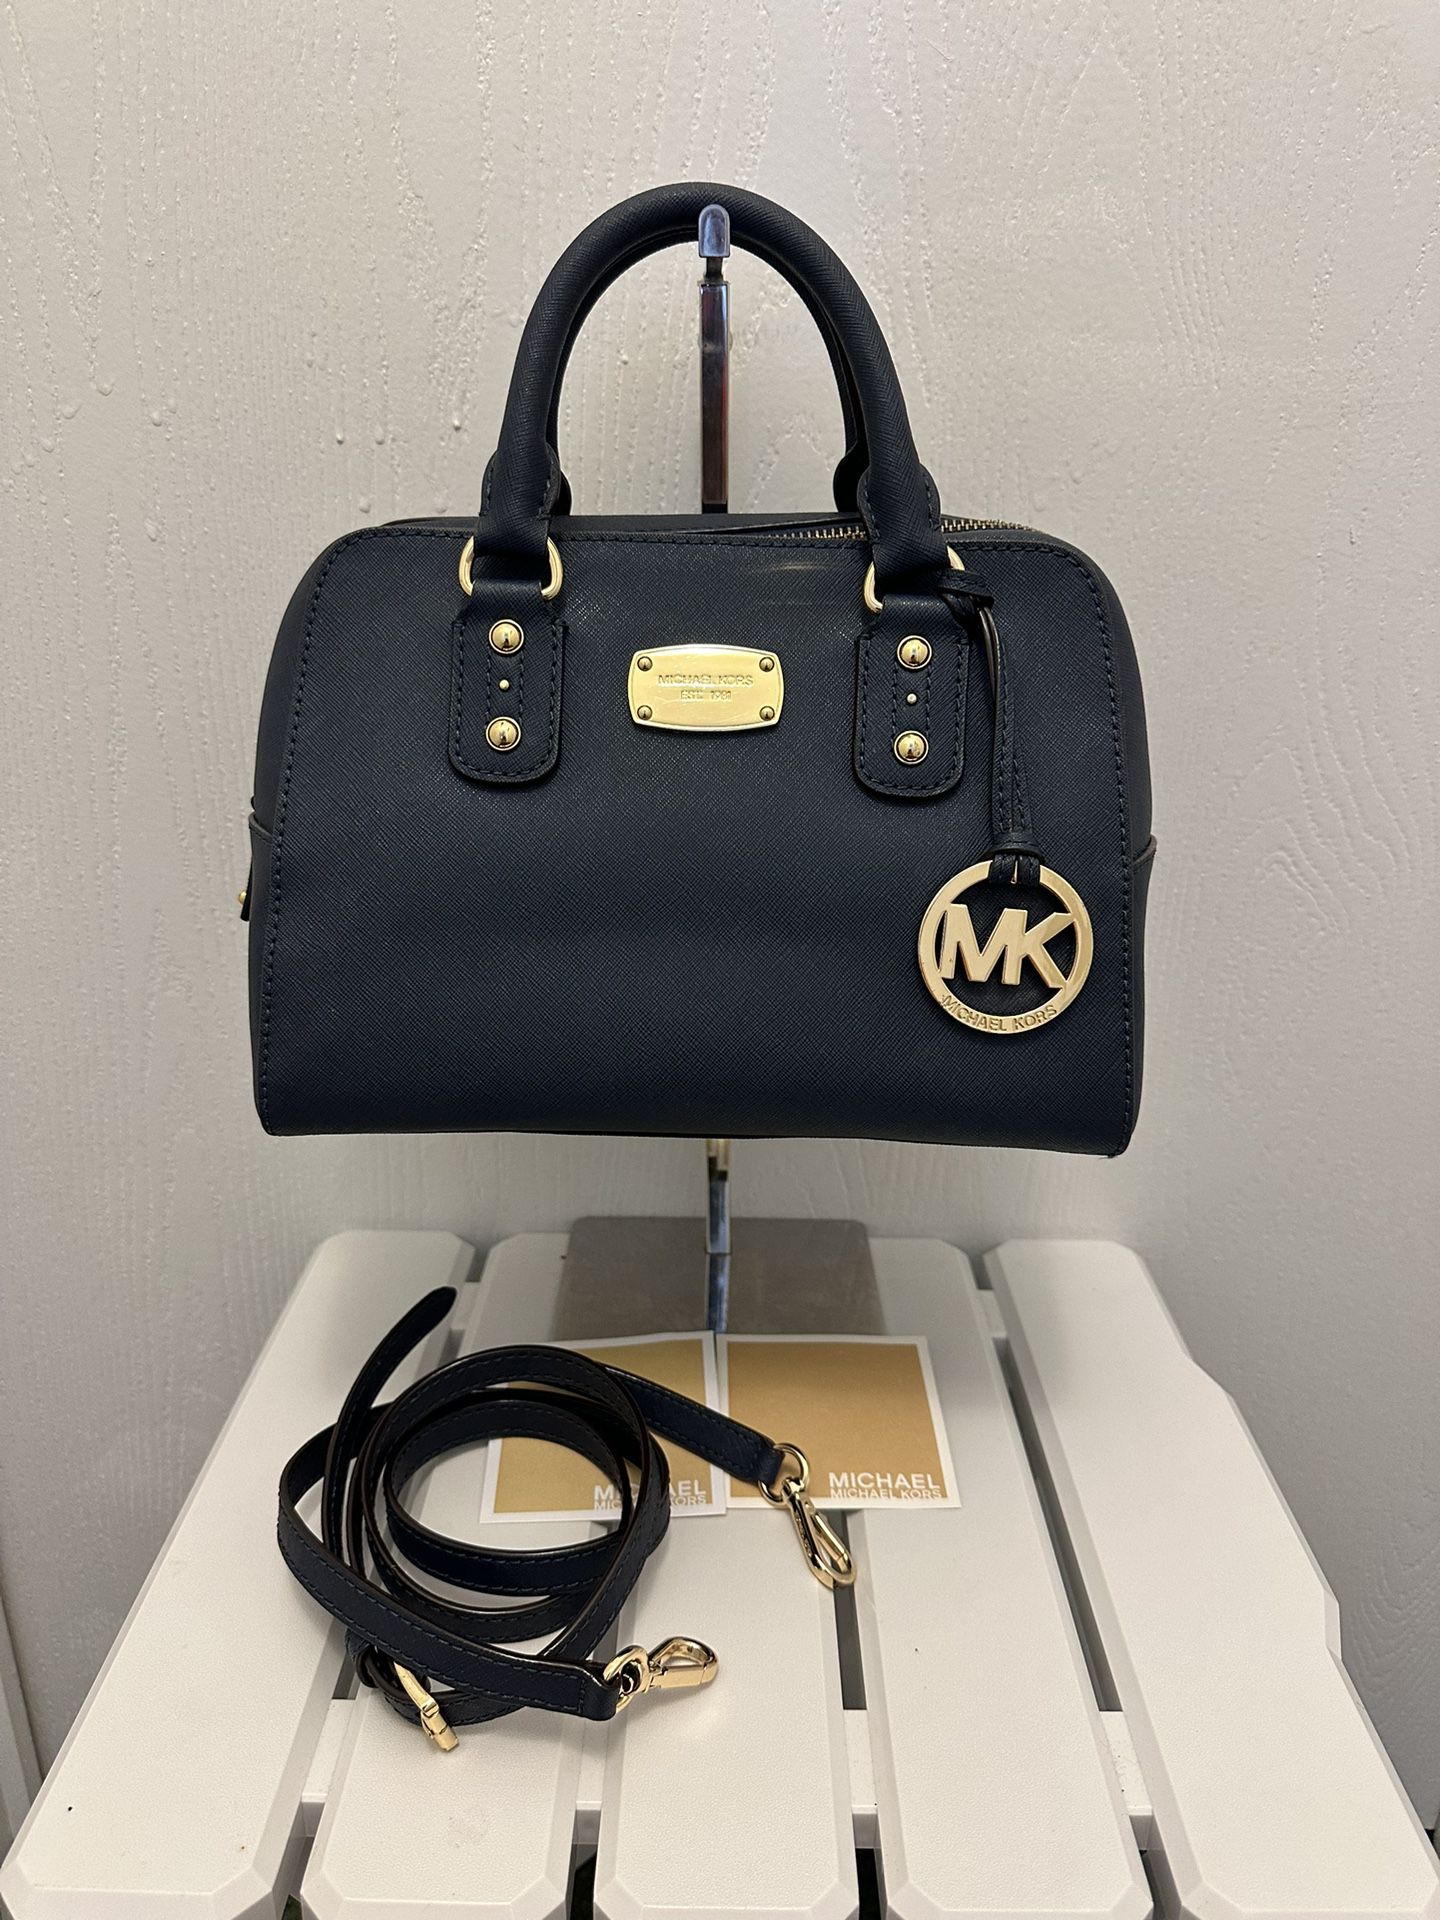 Michael Kors Boston In Excellent Condition 